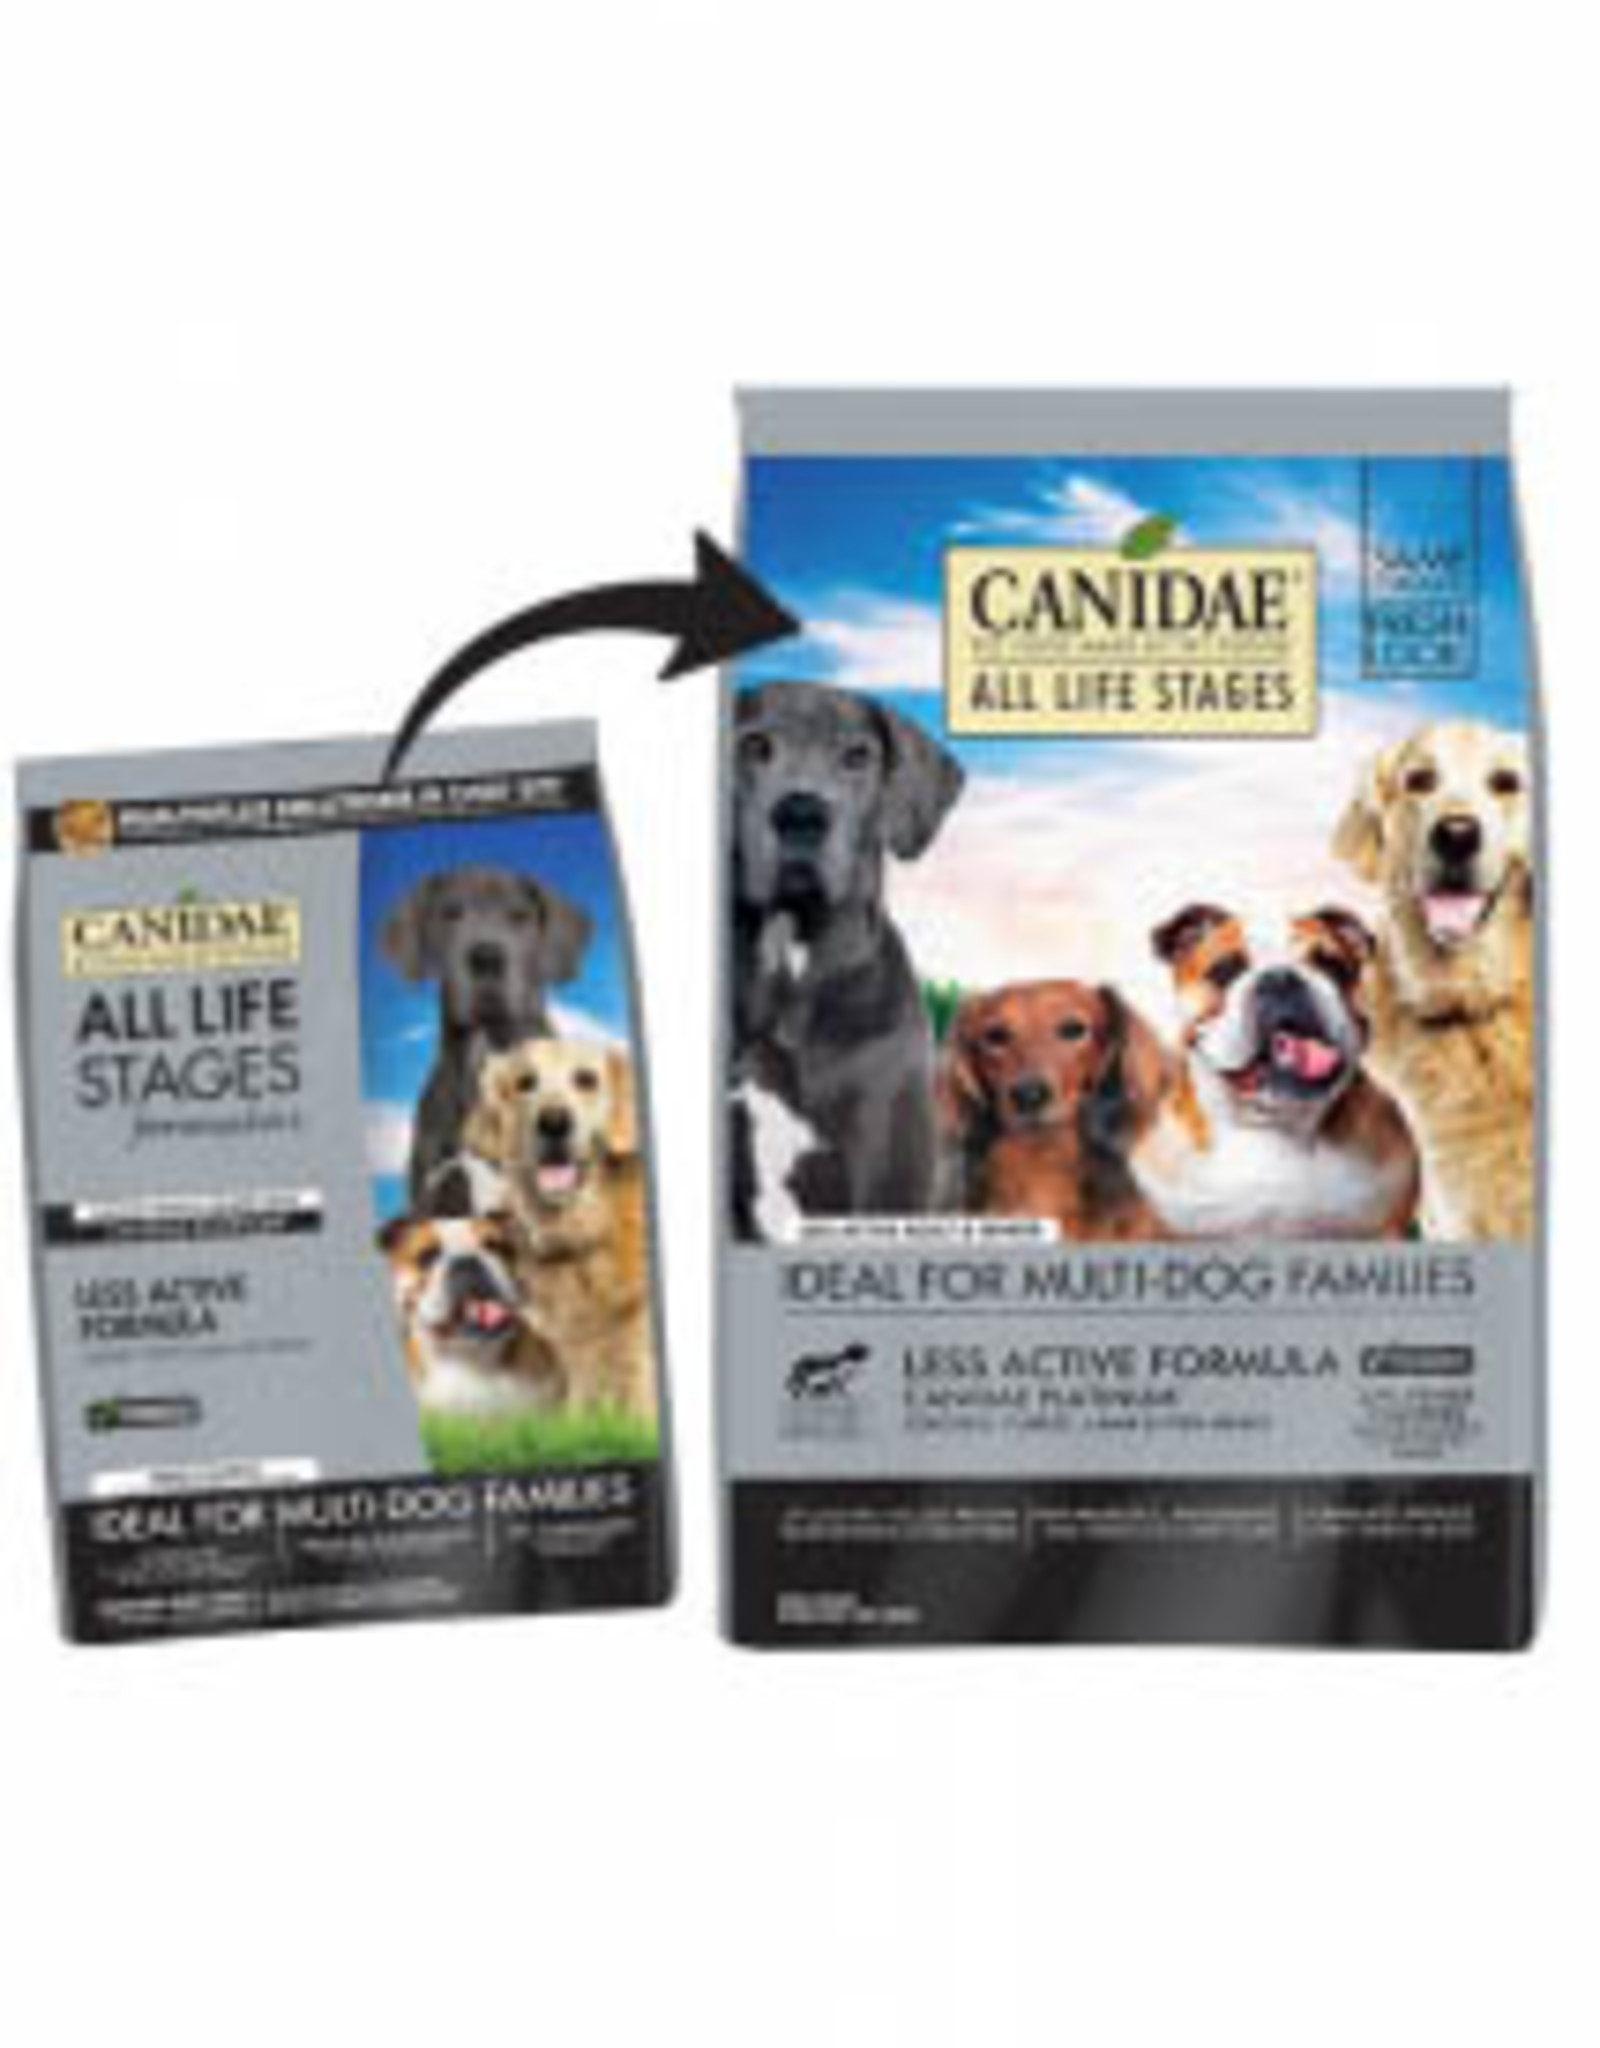 Canidae all Life Stages. Canidae Platinum Formula.